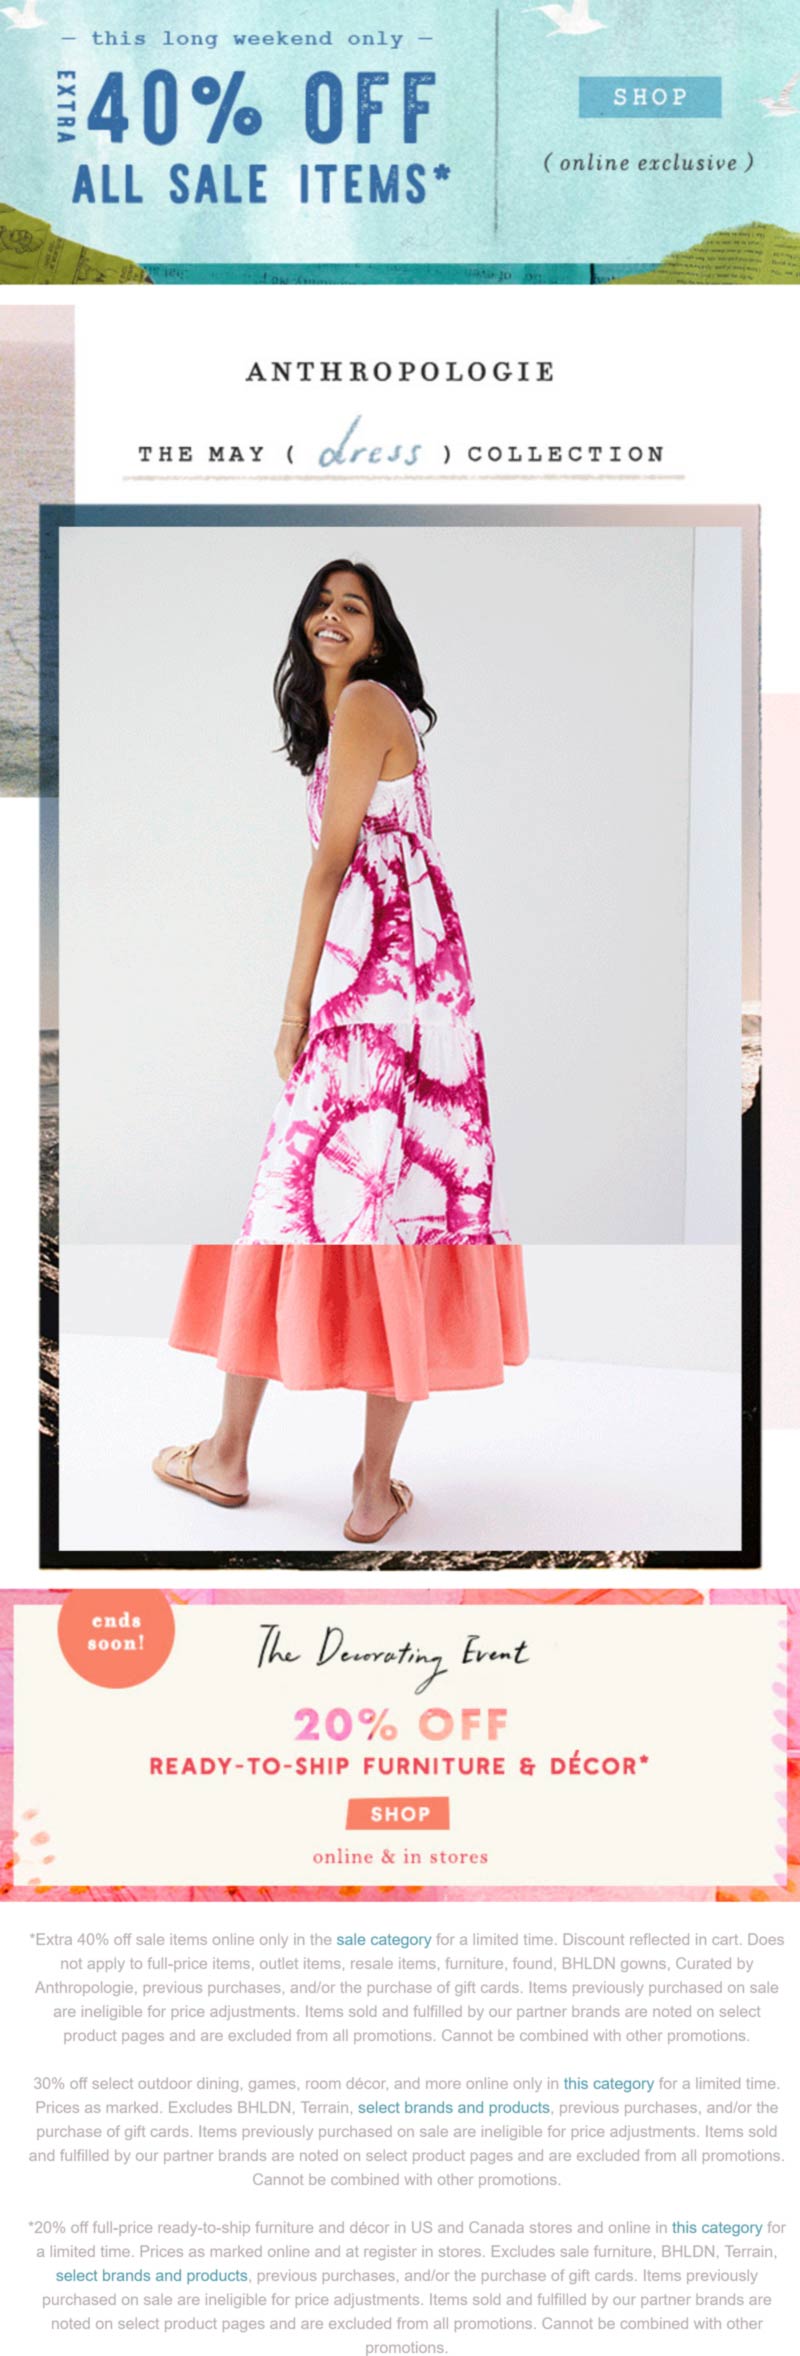 Anthropologie stores Coupon  Extra 40% off sale items today online at Anthropologie #anthropologie 